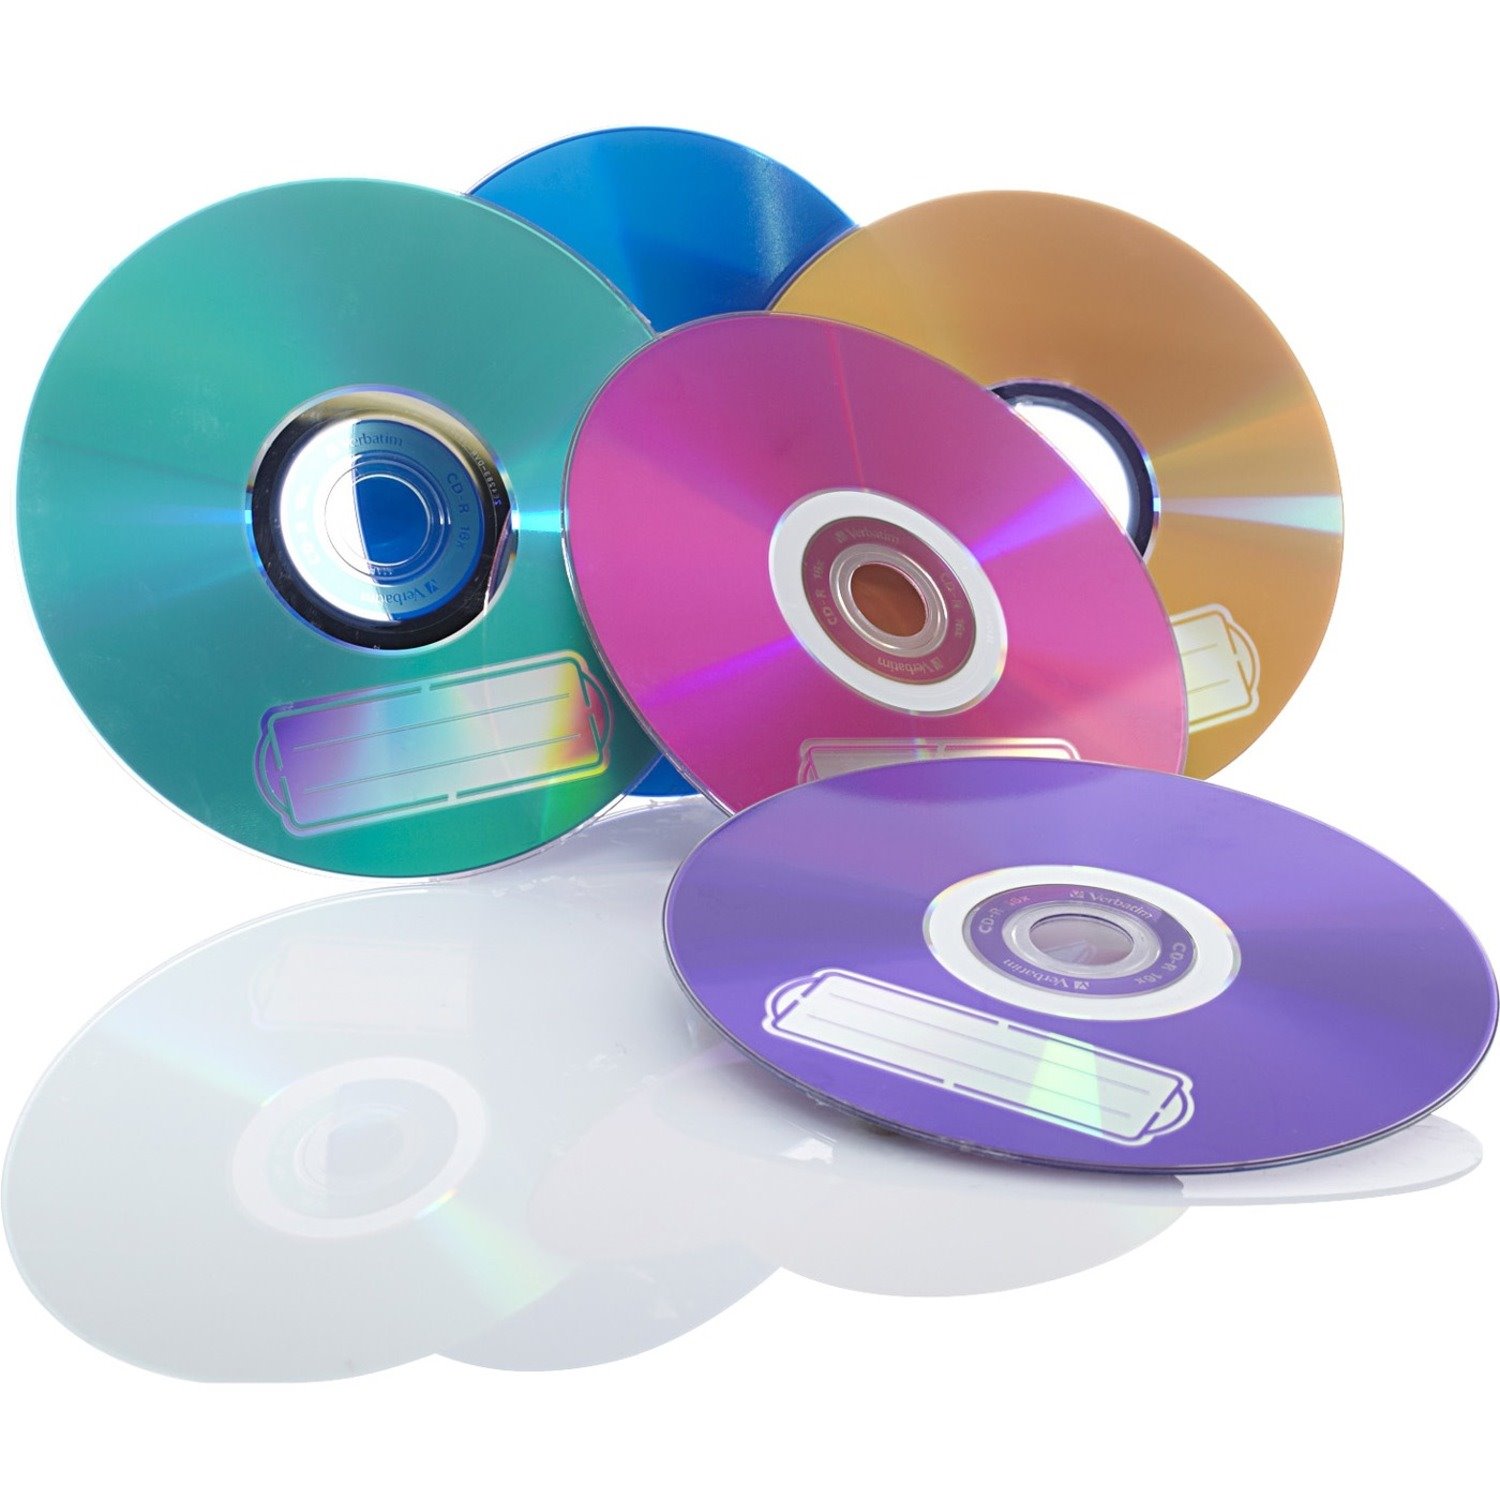 Verbatim CD-R 700MB 52X with Color Branded Surface - 10pk Bulk Box, Assorted